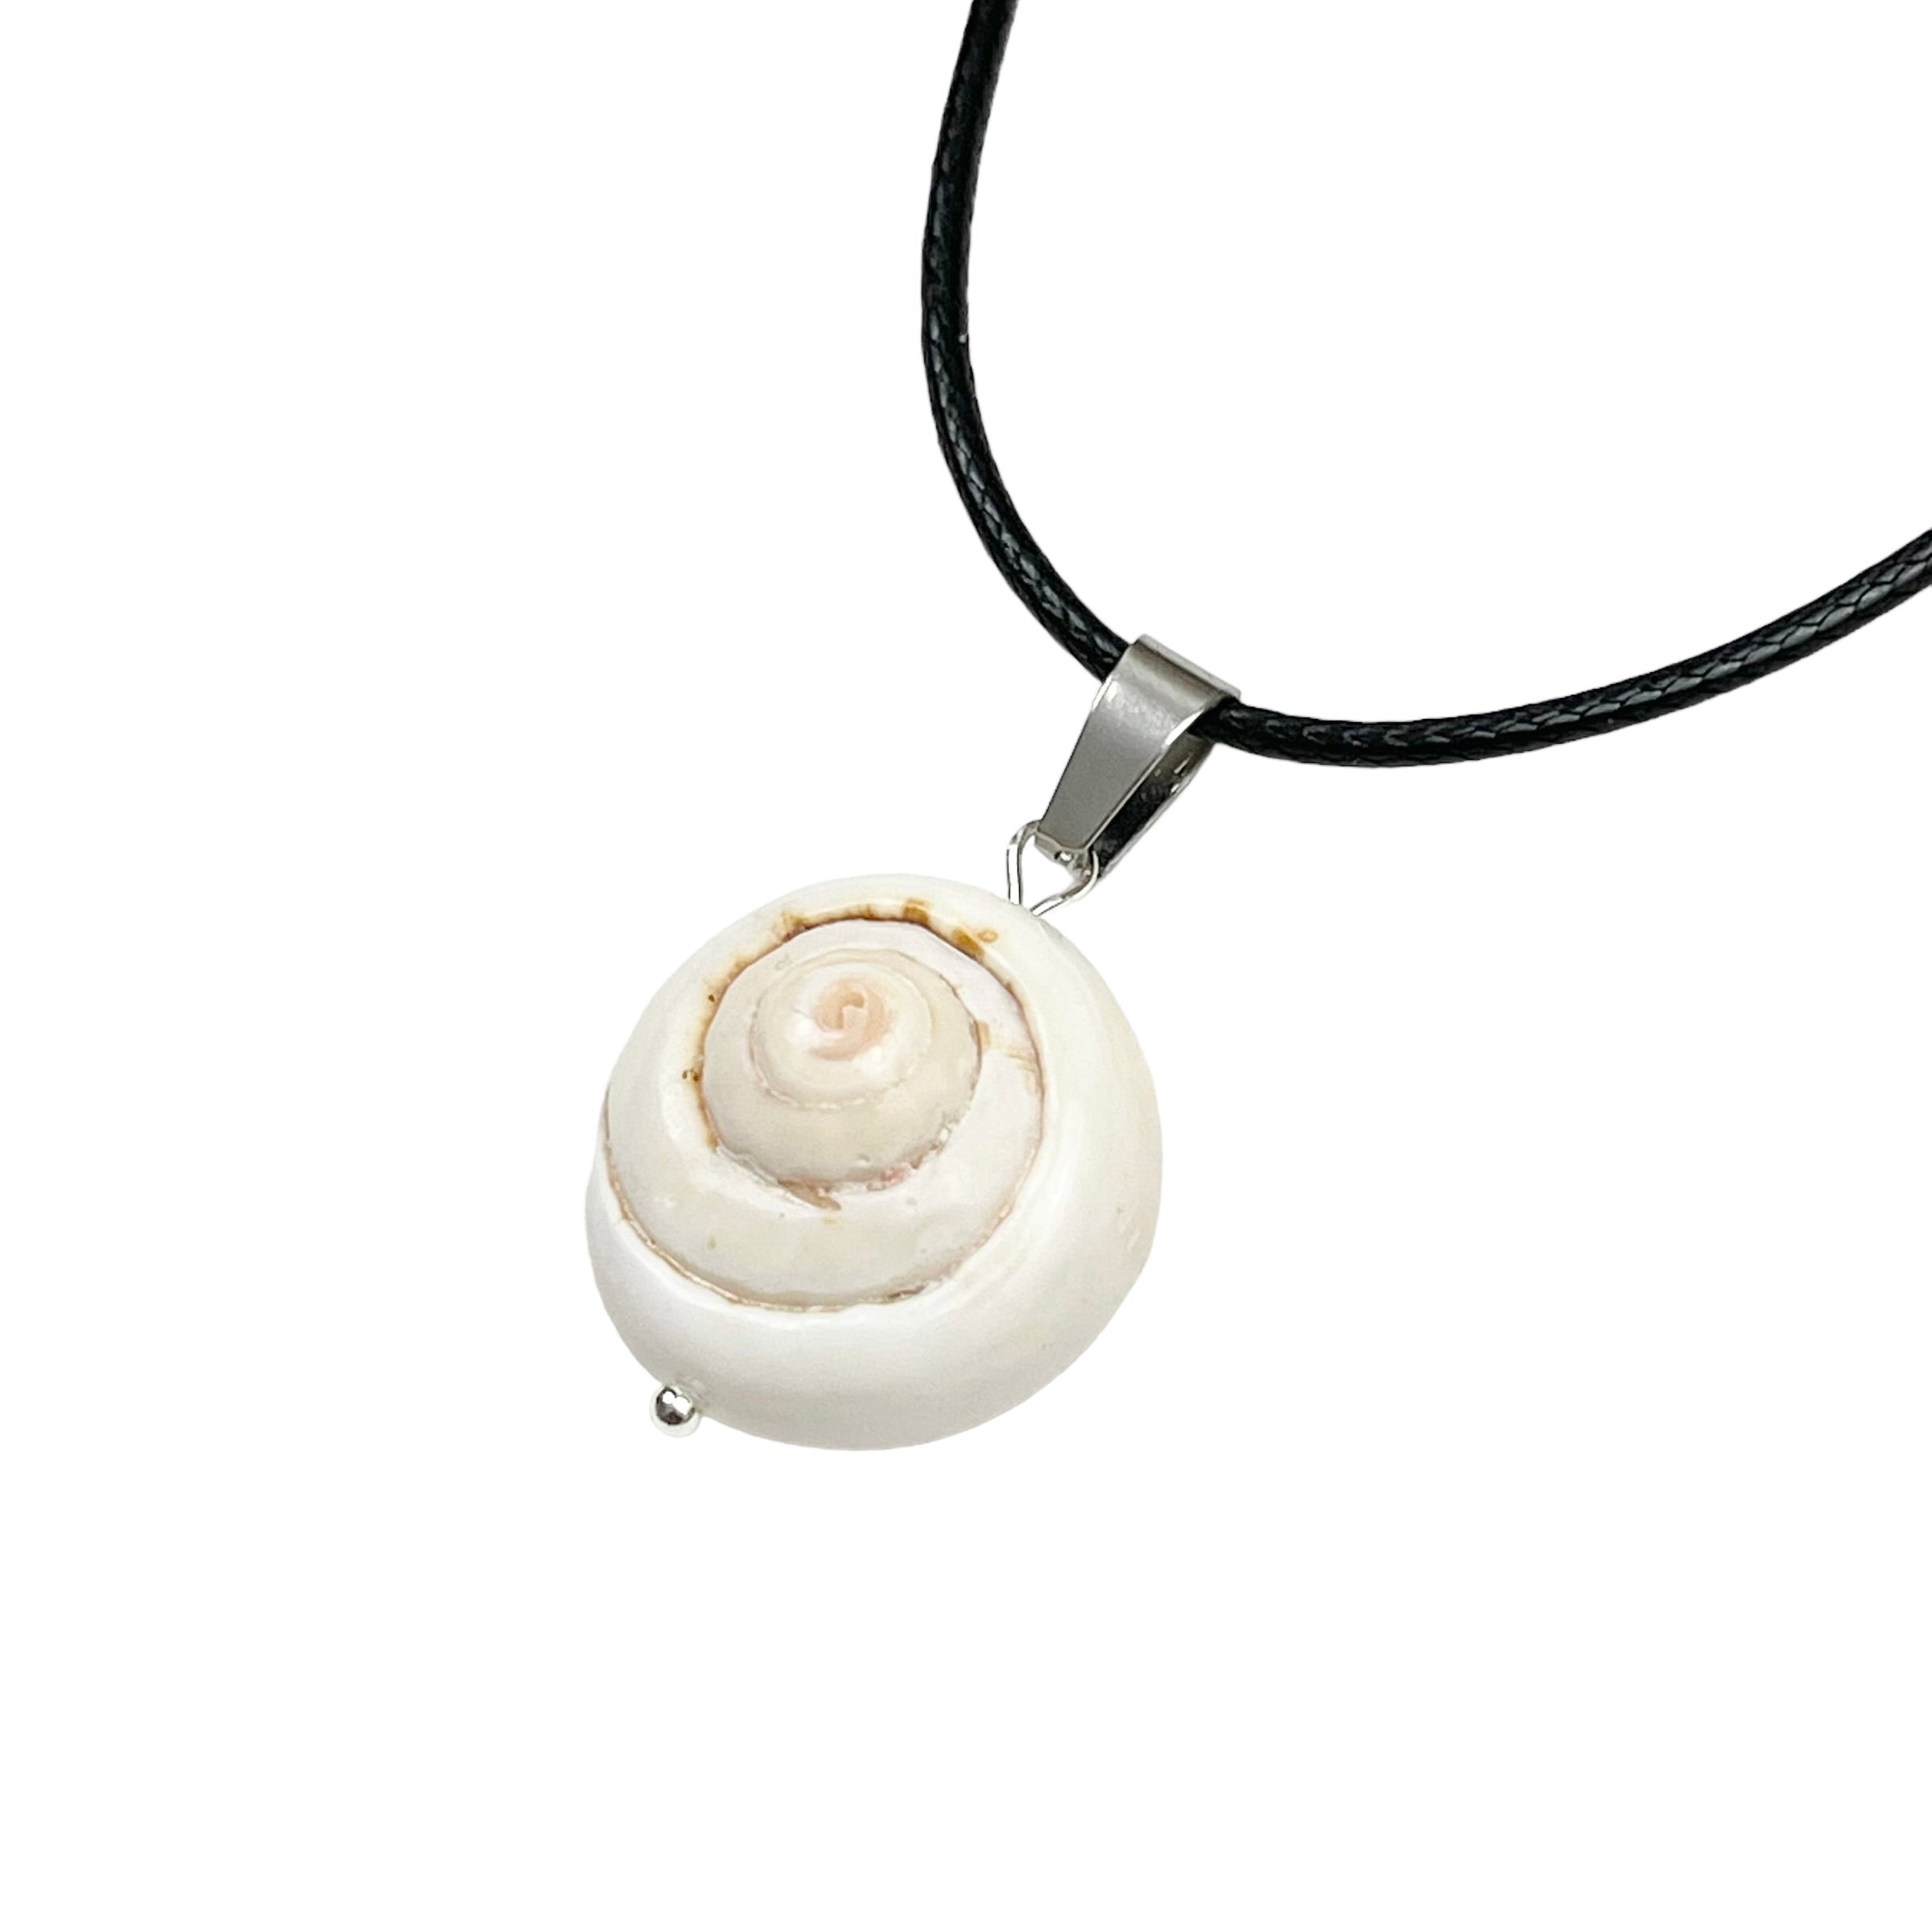 NO RESERVE PRICE - SN2 - Decorative Shell Necklace on custom stand - Cut  Rose Pink Shell, snail shell & Natural Fibres - Catawiki